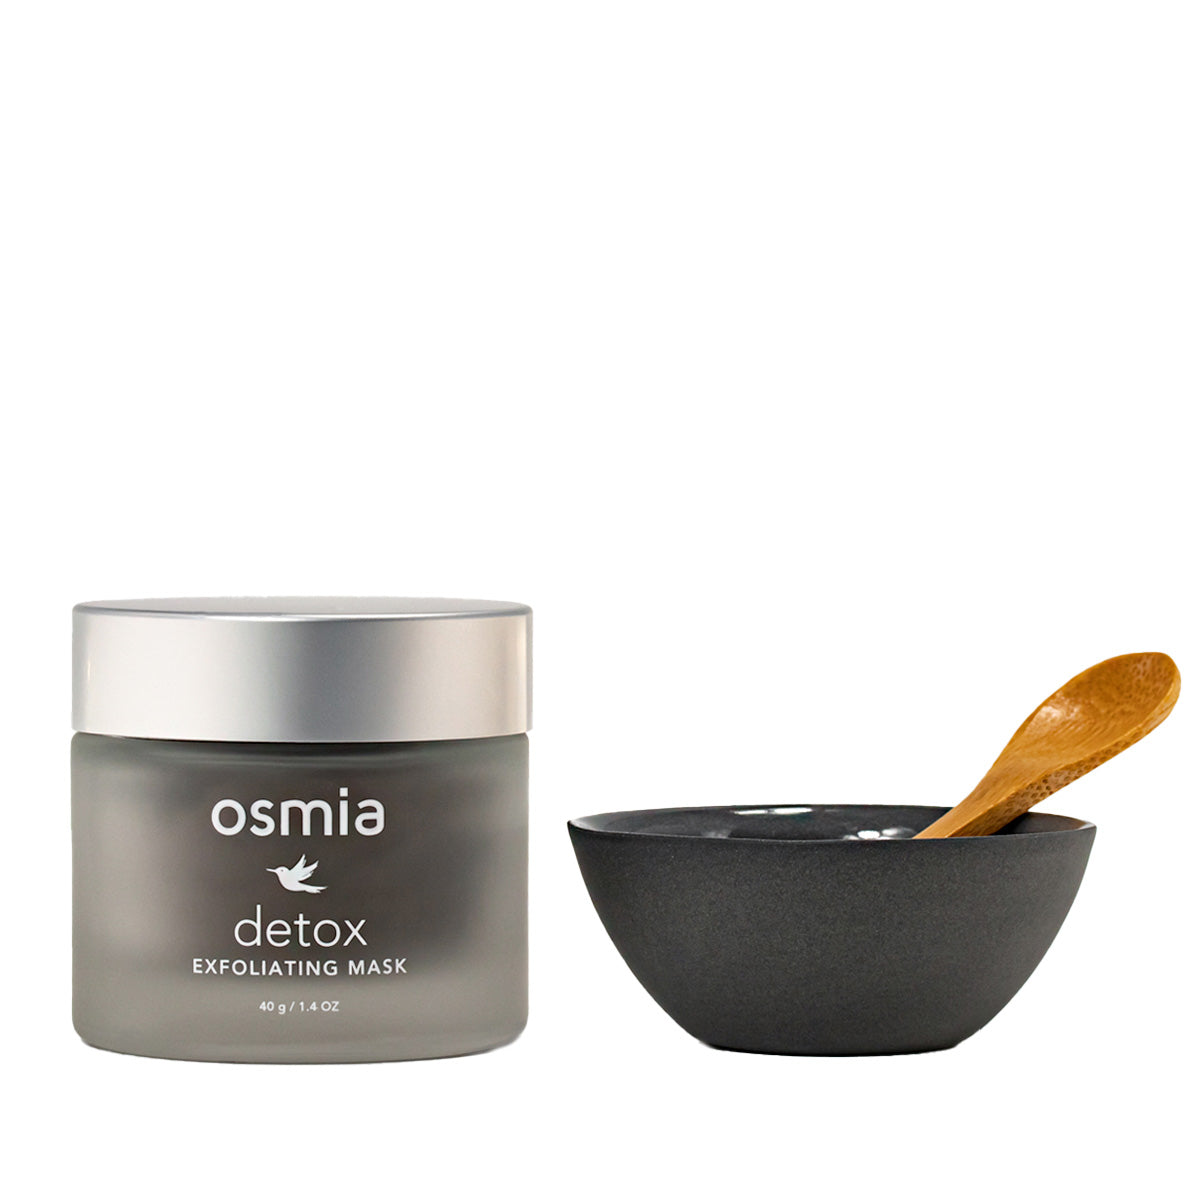 Osmia Detox Exfoliating Mask with Natural Ingredients for Skin Rejuvenation - Beauty Chic Avenue's Holiday Self-Care